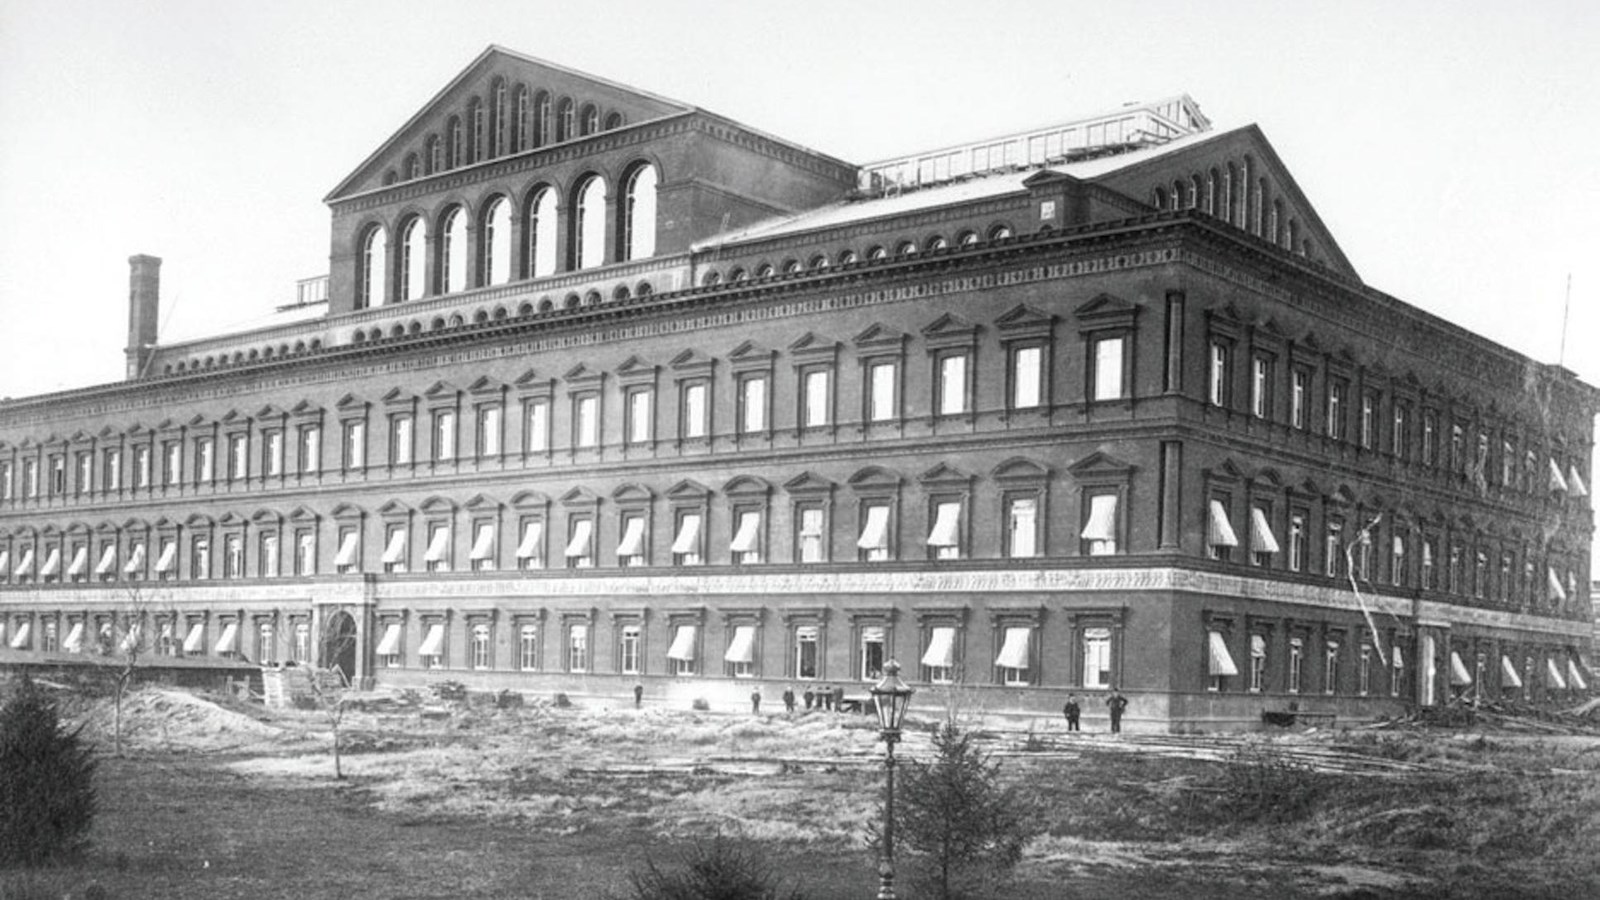 The Pension Building at the time of its completion in 1887. (Library of Congress)